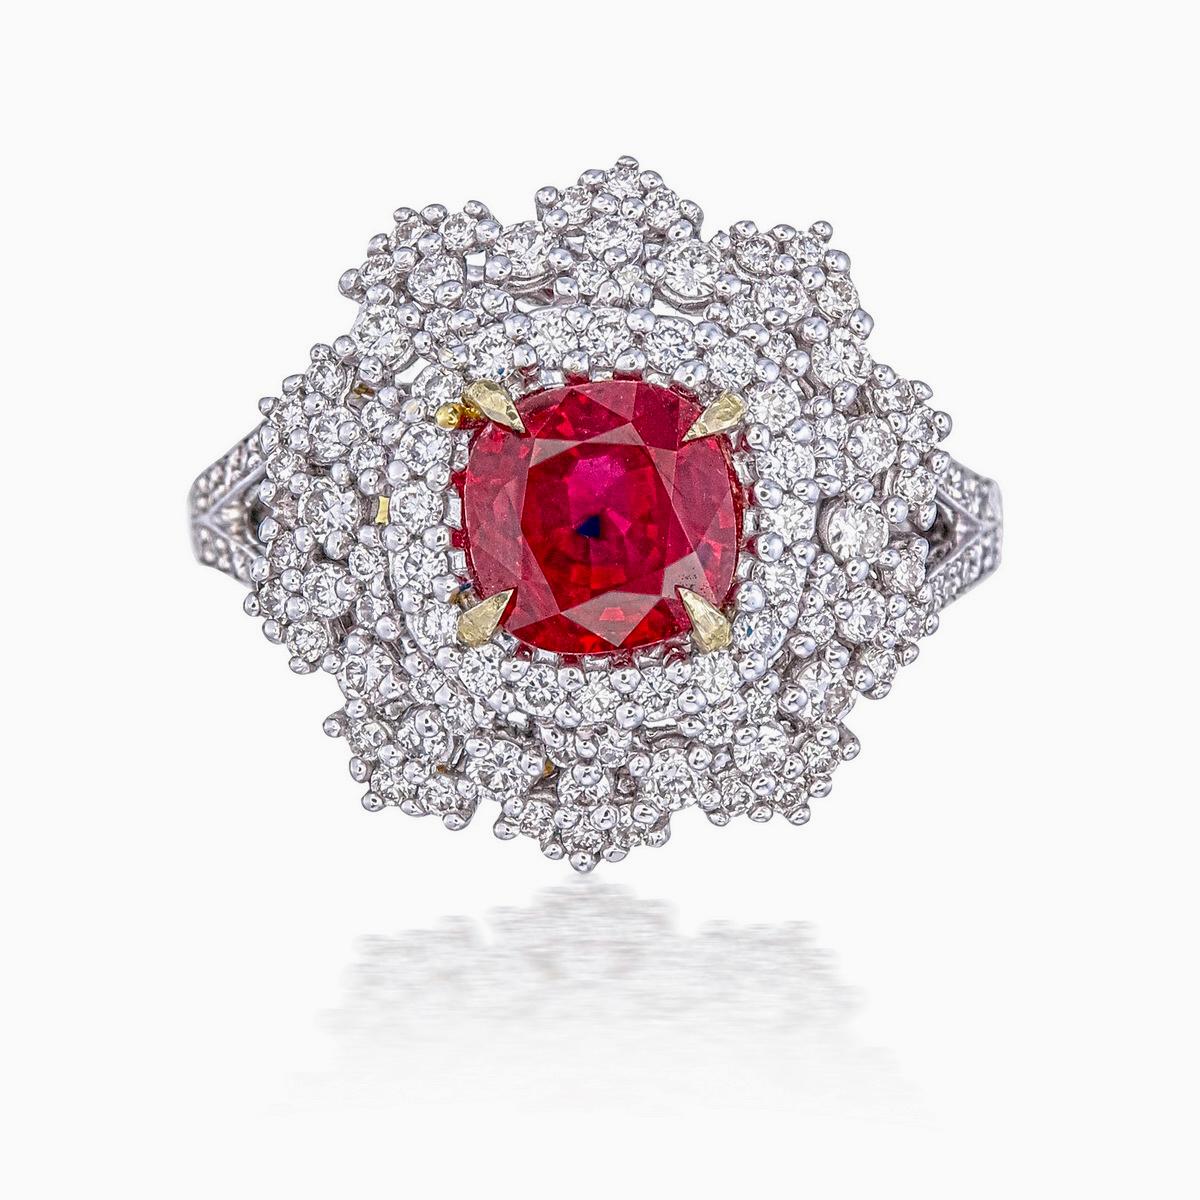 A brand new handcrafted ruby ring by Rewa Jewels. The ring's center stone is 1.49 carat Burmese ruby certified by Gem Research Swisslab (GRS) as natural, unheated, 'Pigeon blood' with the certificate number 2021-110632. The centre ruby has been set